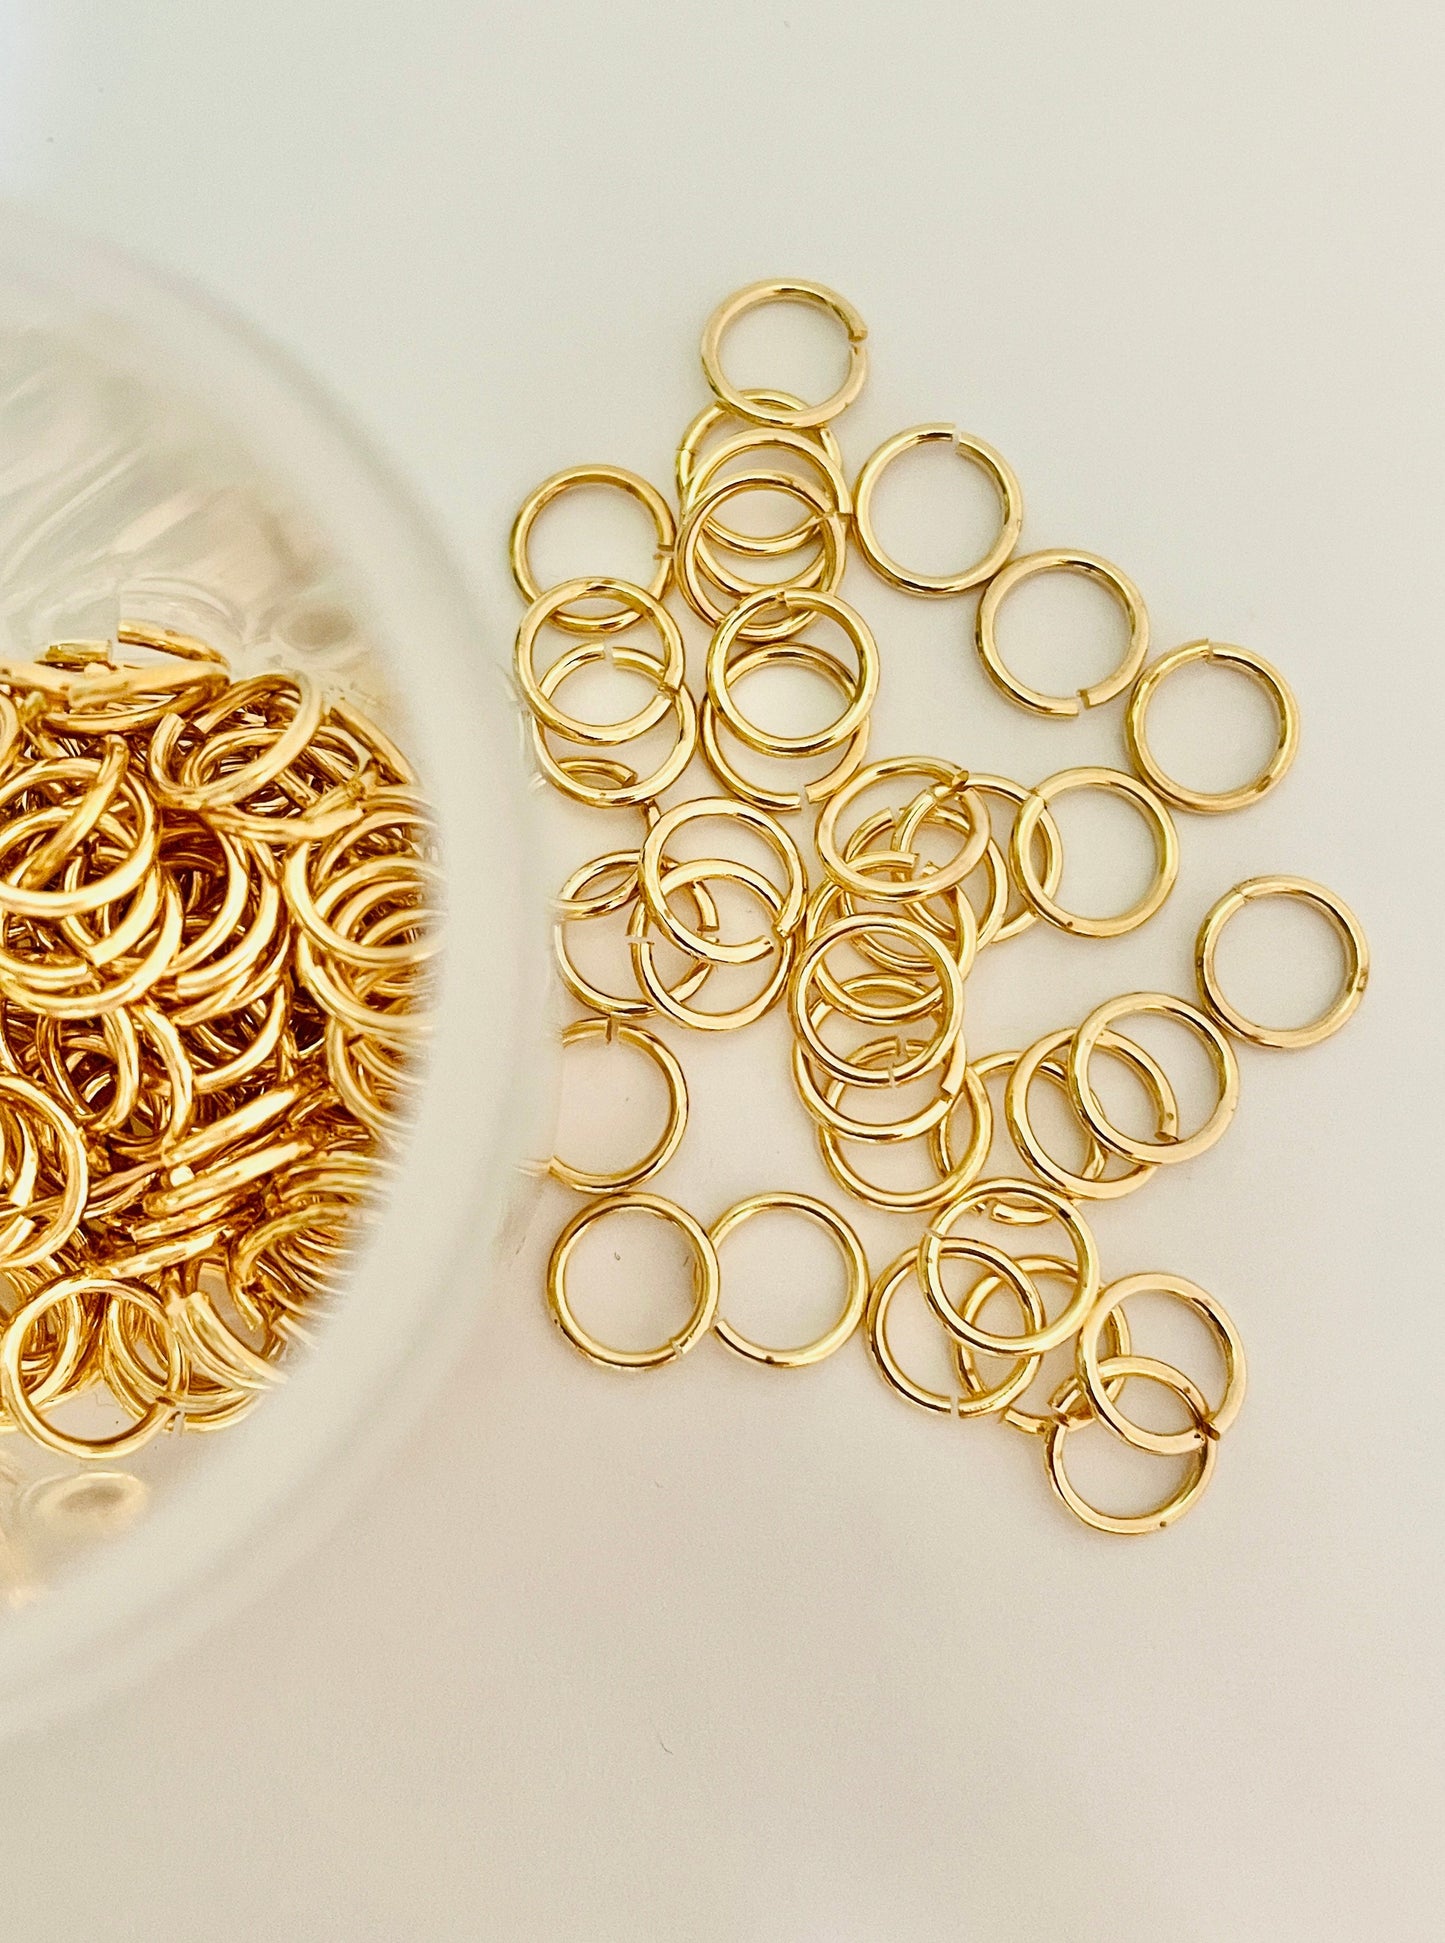 8mm Gold Plated Open Jump Rings (Approx 100 pieces)